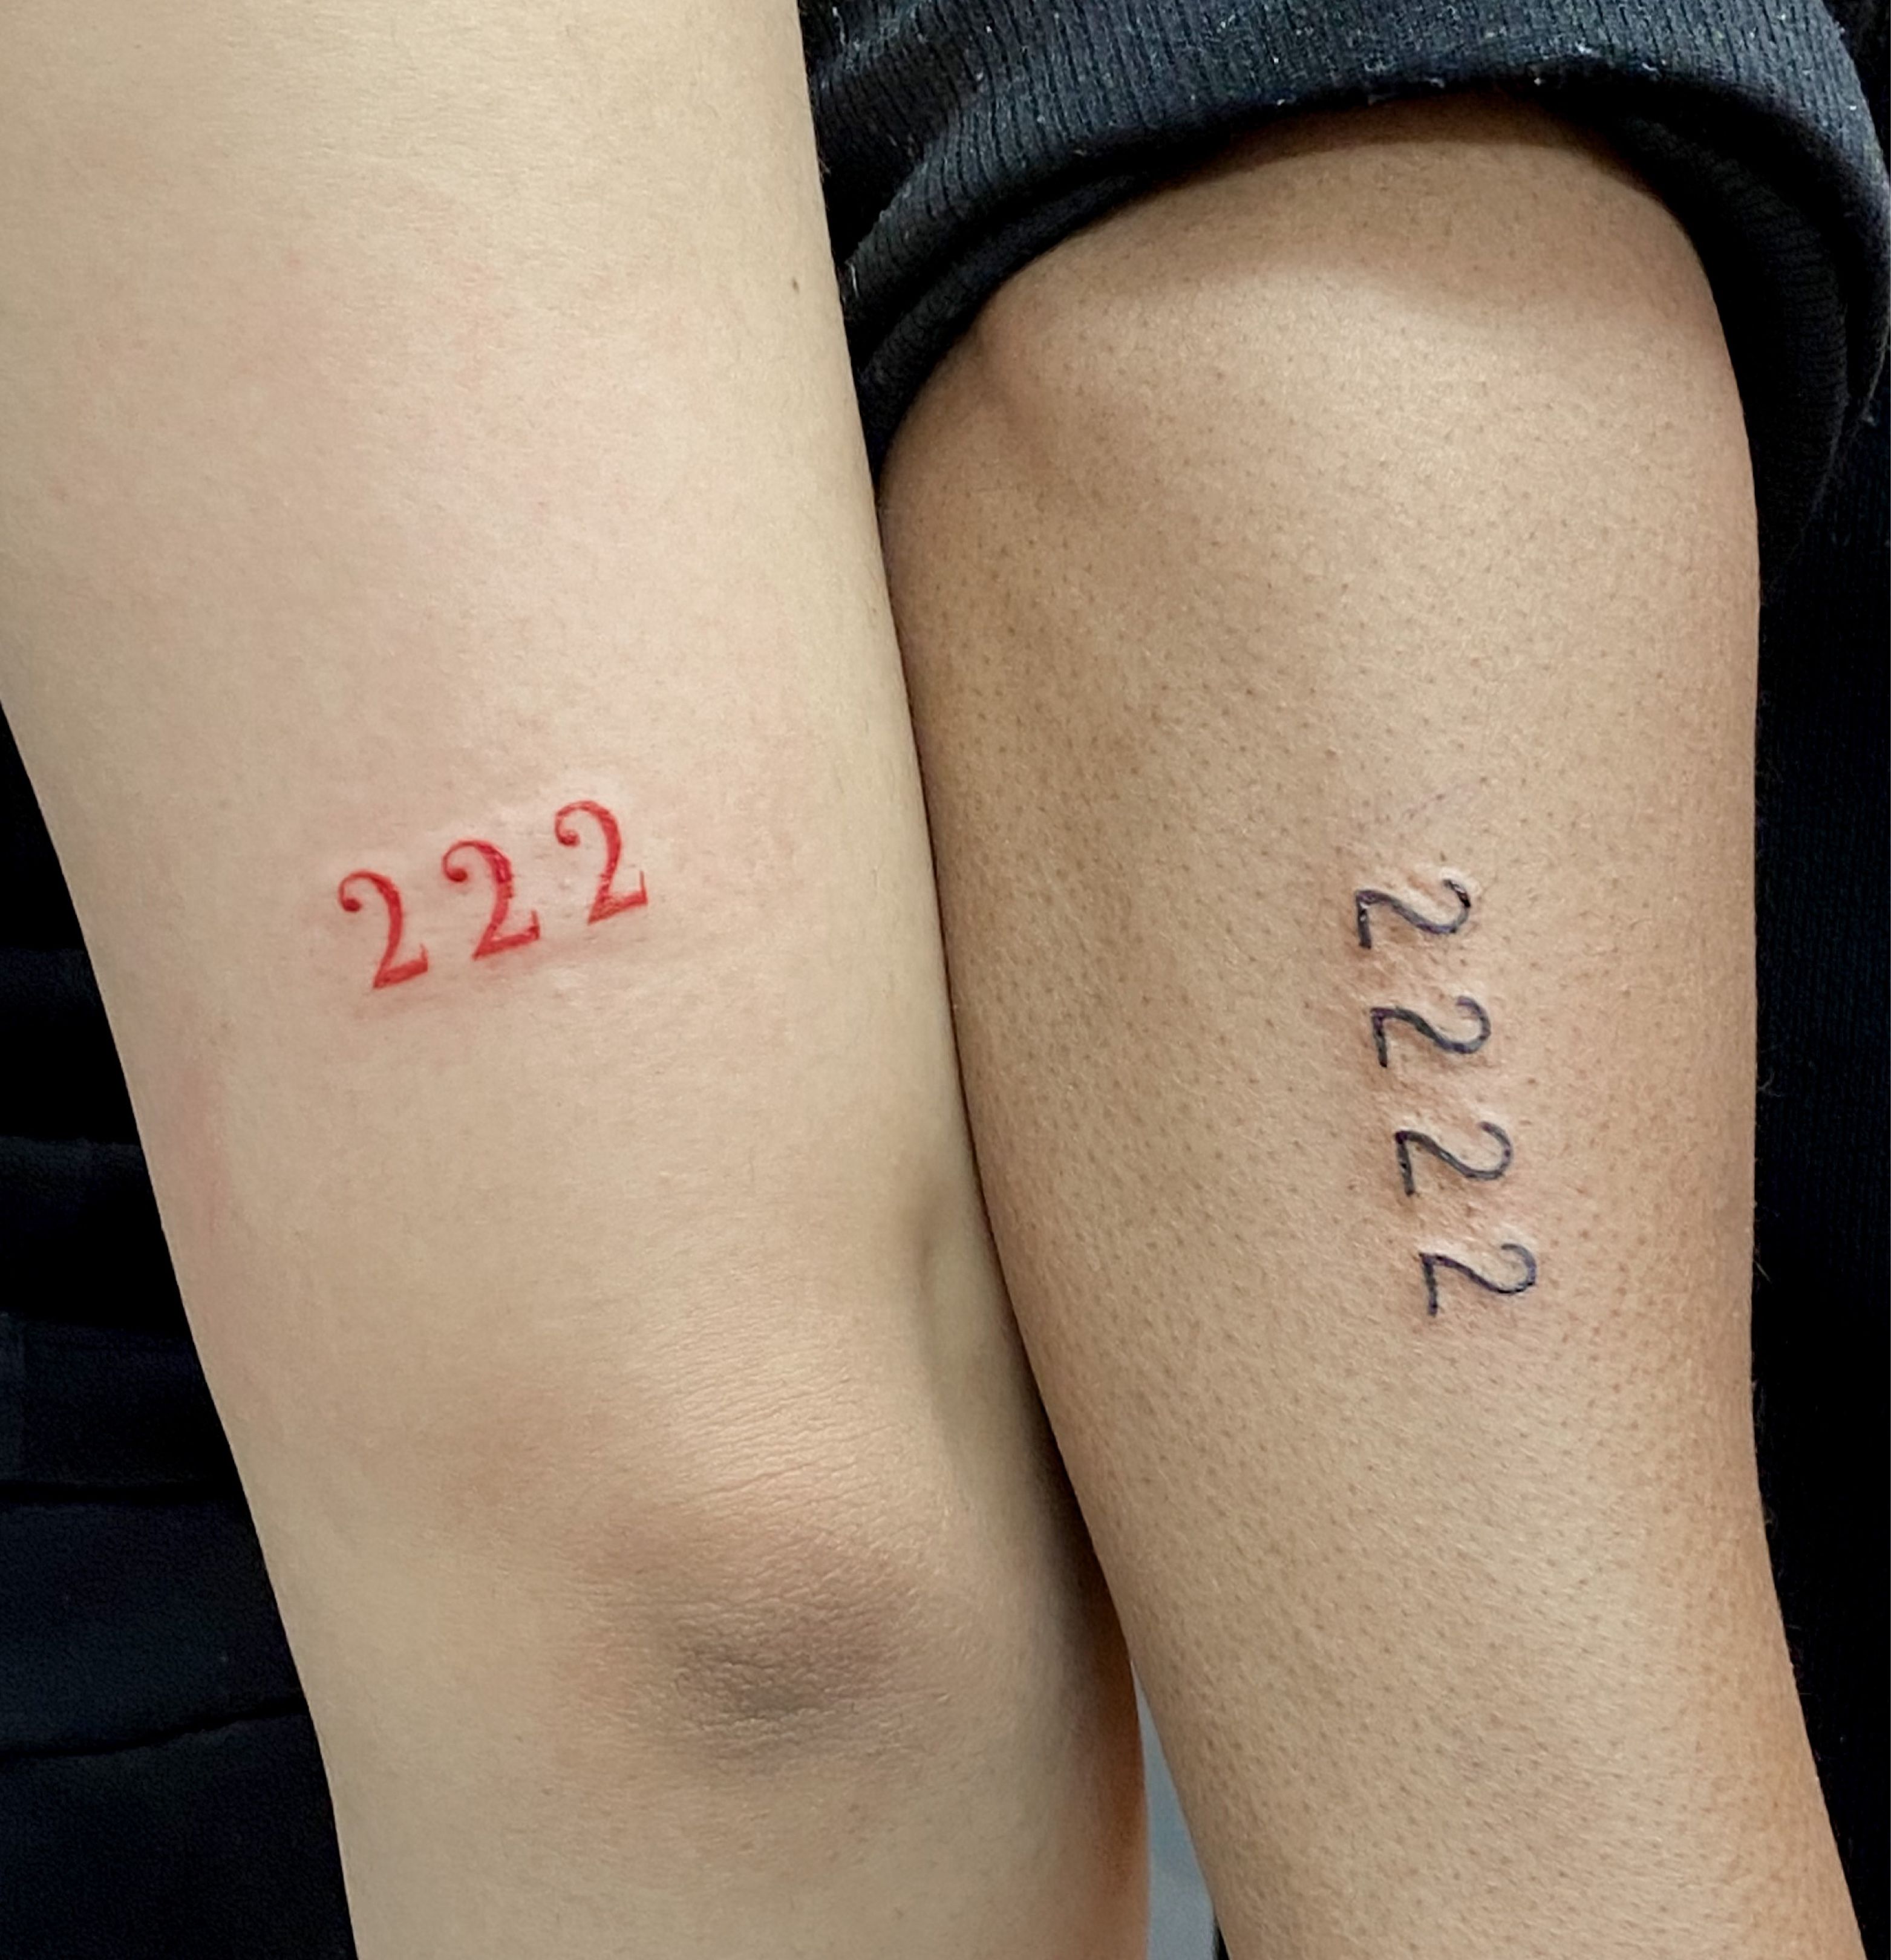 222 Tattoo  Meaning Font and Angel Number Tattoo  FashionPaid Blog